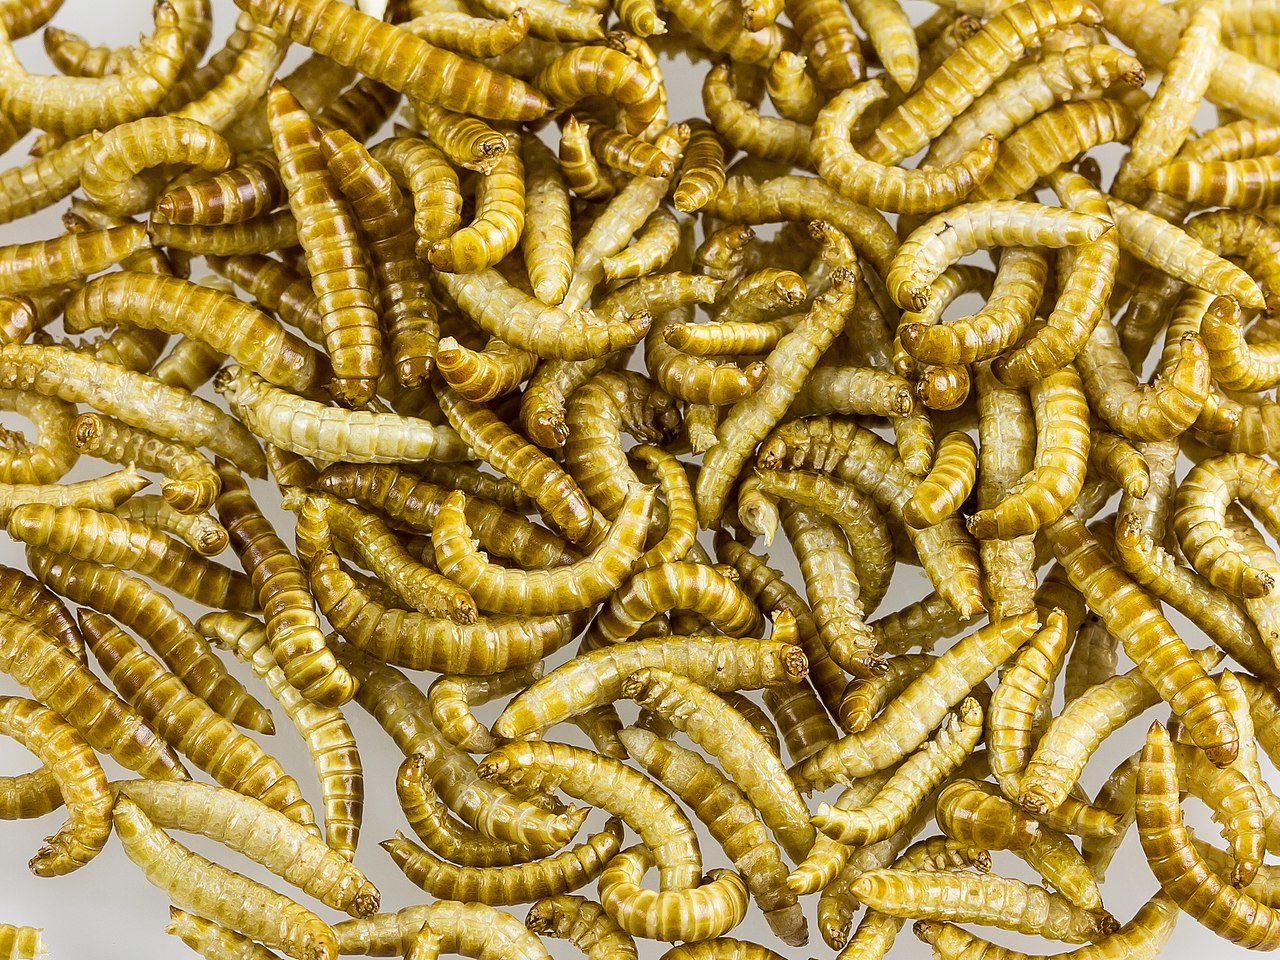 ORIGINAL FILE NAME: Buffaloworms_as_food-2392.JPG CAPTIONS IN DIFFERENT LANGUAGES: EN: DE: SV: Ätbara insekter – fotokredit till Raimond Spekking FI: LINK IN CAPTION / LINK TO SOURCE: https://en.wikipedia.org/wiki/Alphitobius_diaperinus#/media/File:Buffaloworms_as_food-2392.jpg IMAGE ADDRESS: https://upload.wikimedia.org/wikipedia/commons/thumb/2/20/Buffaloworms_as_food-2392.jpg/1280px-Buffaloworms_as_food-2392.jpg DOWNLOAD PLATFORM: Flickr TITLE: Freeze-dried larvae of the litter beetle (buffalo worms) as food, or food ingredient KEYWORDS: buffalo worms, Party Bugs AUTHOR: Raimond Spekking COMMENTS: COPYRIGHT: © Raimond Spekking / CC BY-SA 4.0 (via Wikimedia Commons) THIS INFORMATION WAS VALID ON 2.4.2021